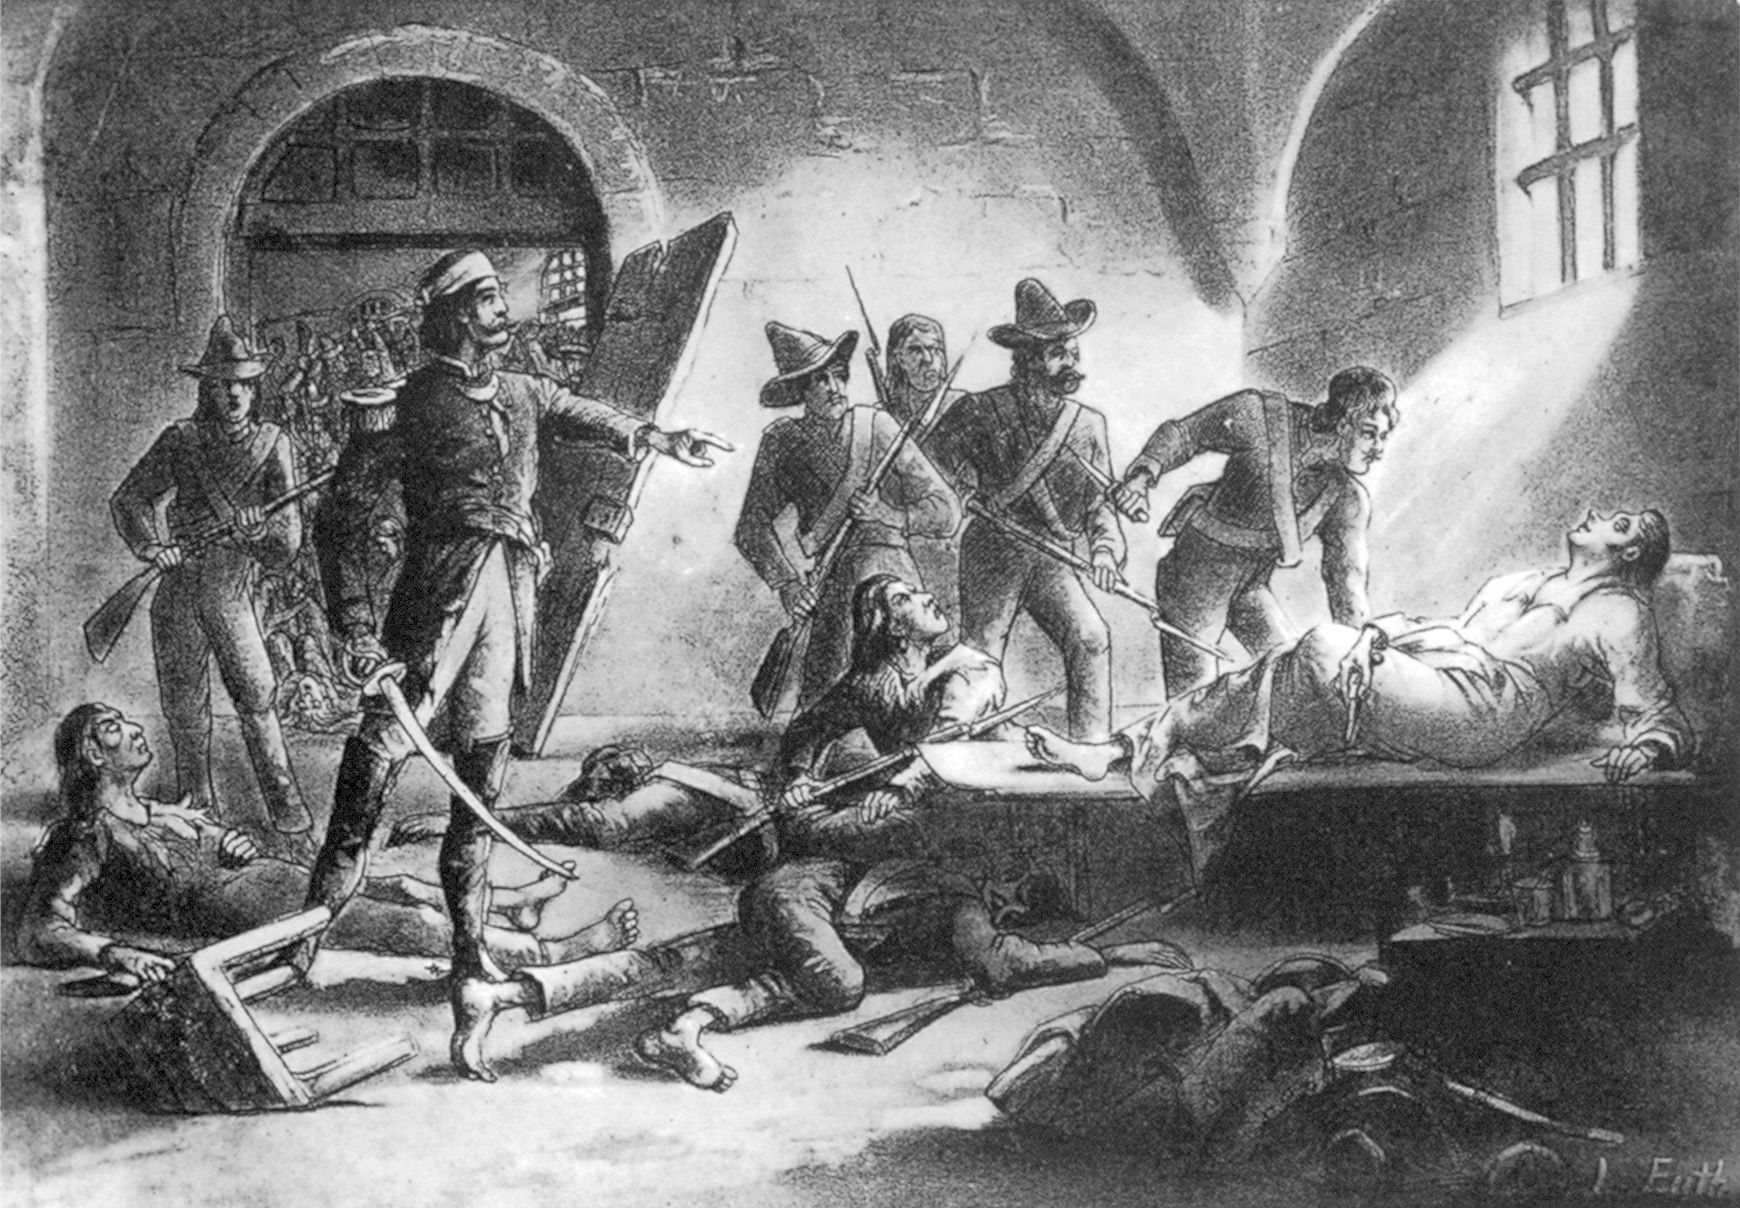 As the battle was ending, Jim Bowie was shot and bayoneted on his sickbed.